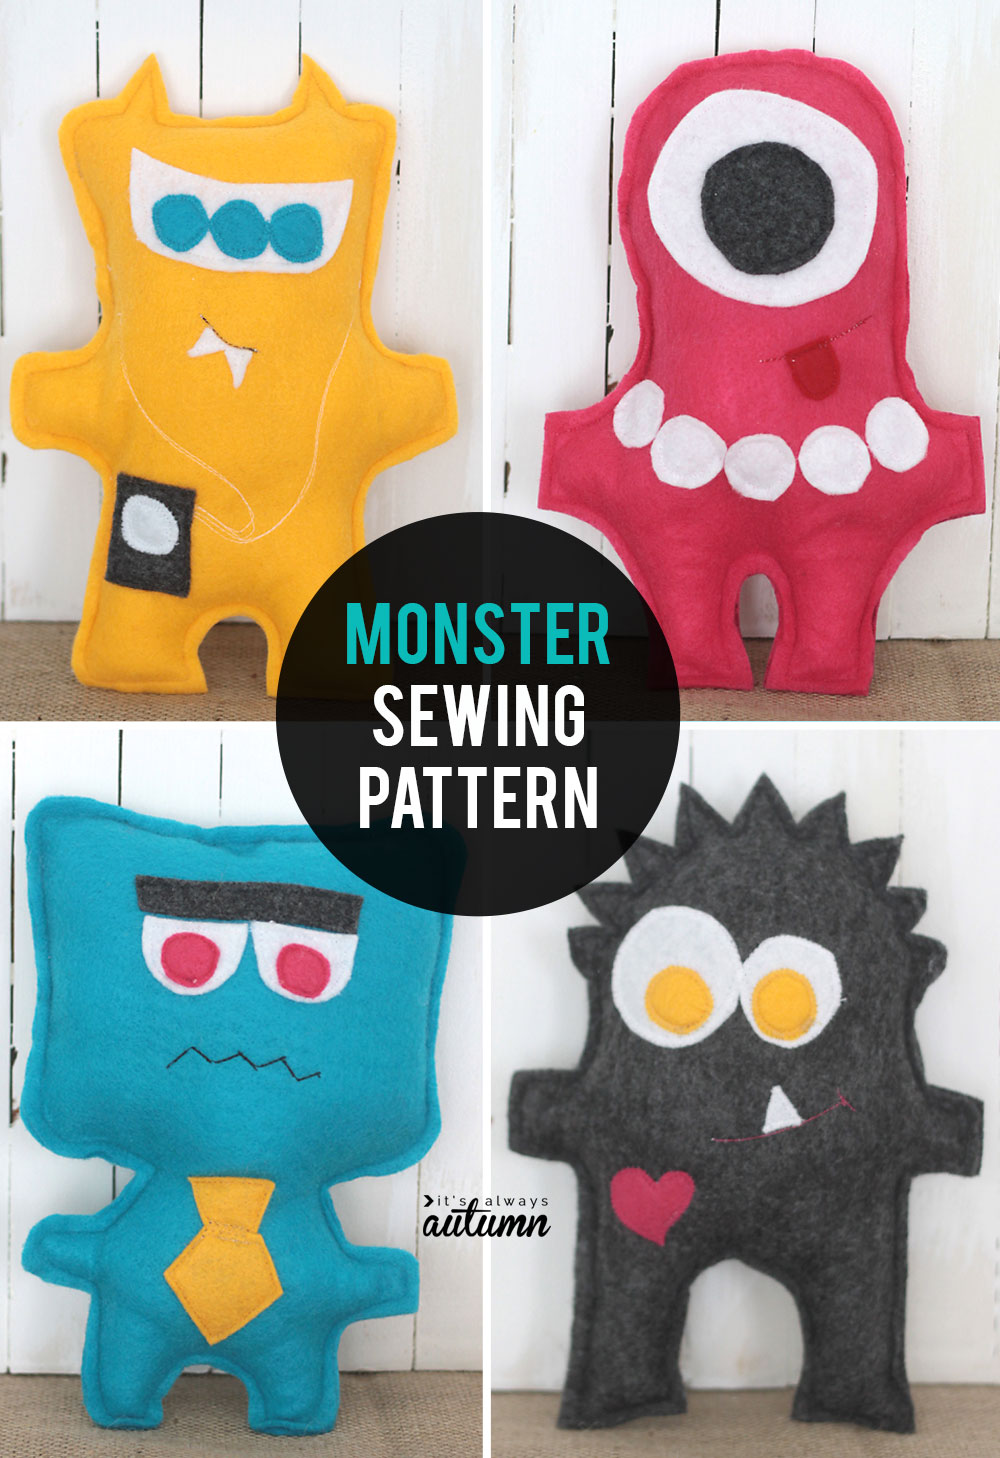 PDF Sewing Patterns Made Easy - A Beginners Guide for the